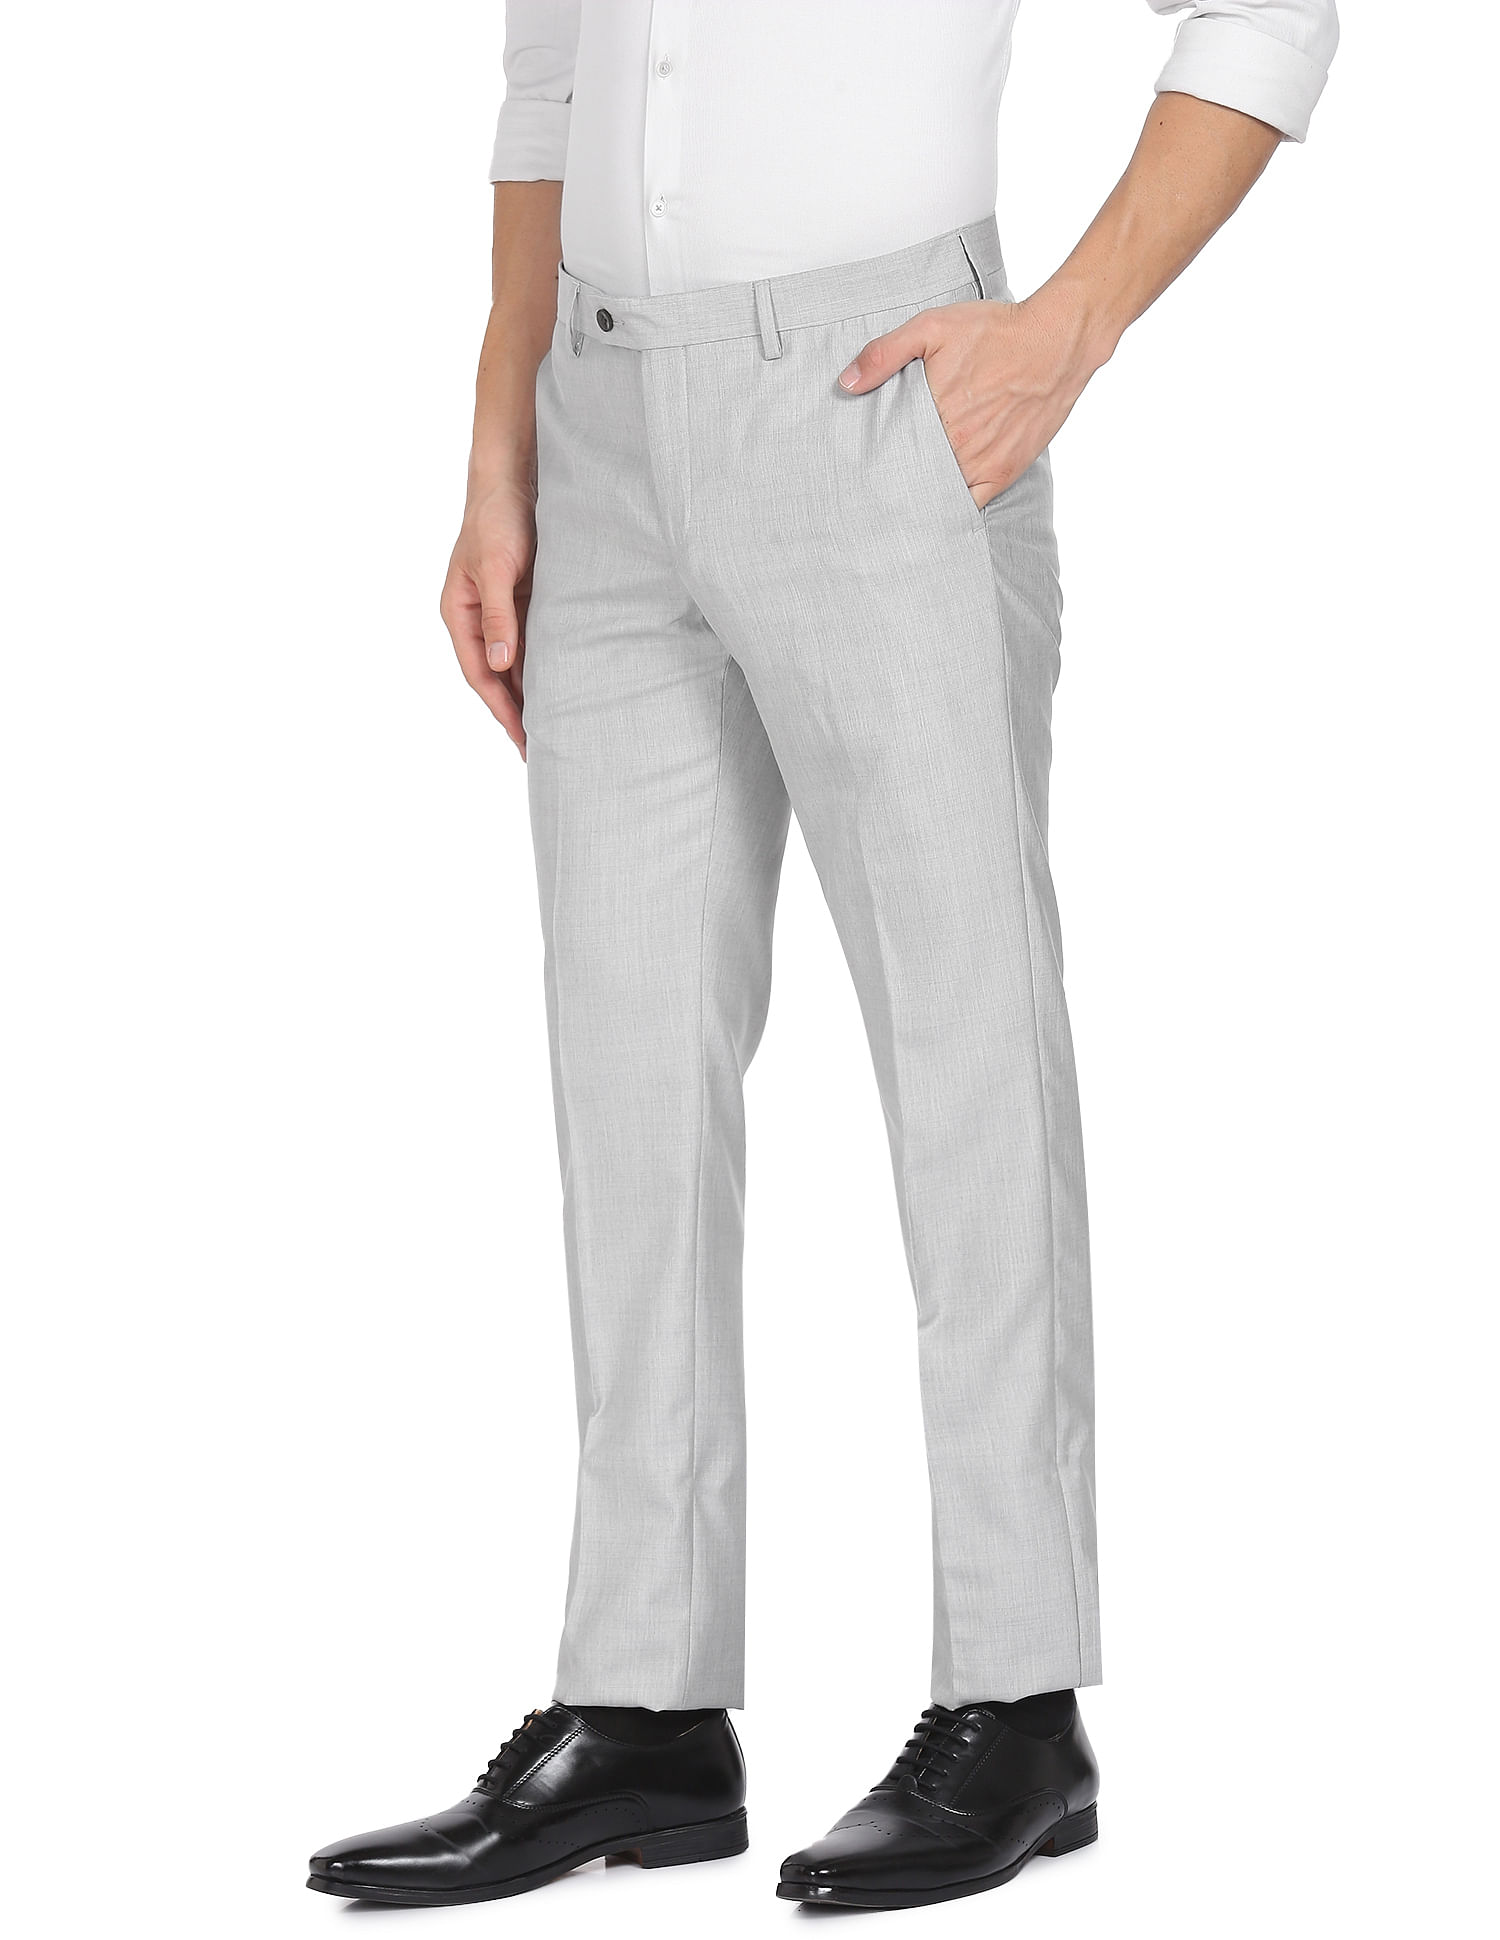 Buy AD by Arvind Smart Waist Heathered Formal Trousers(Grey 30)  8904290707485 at Amazon.in